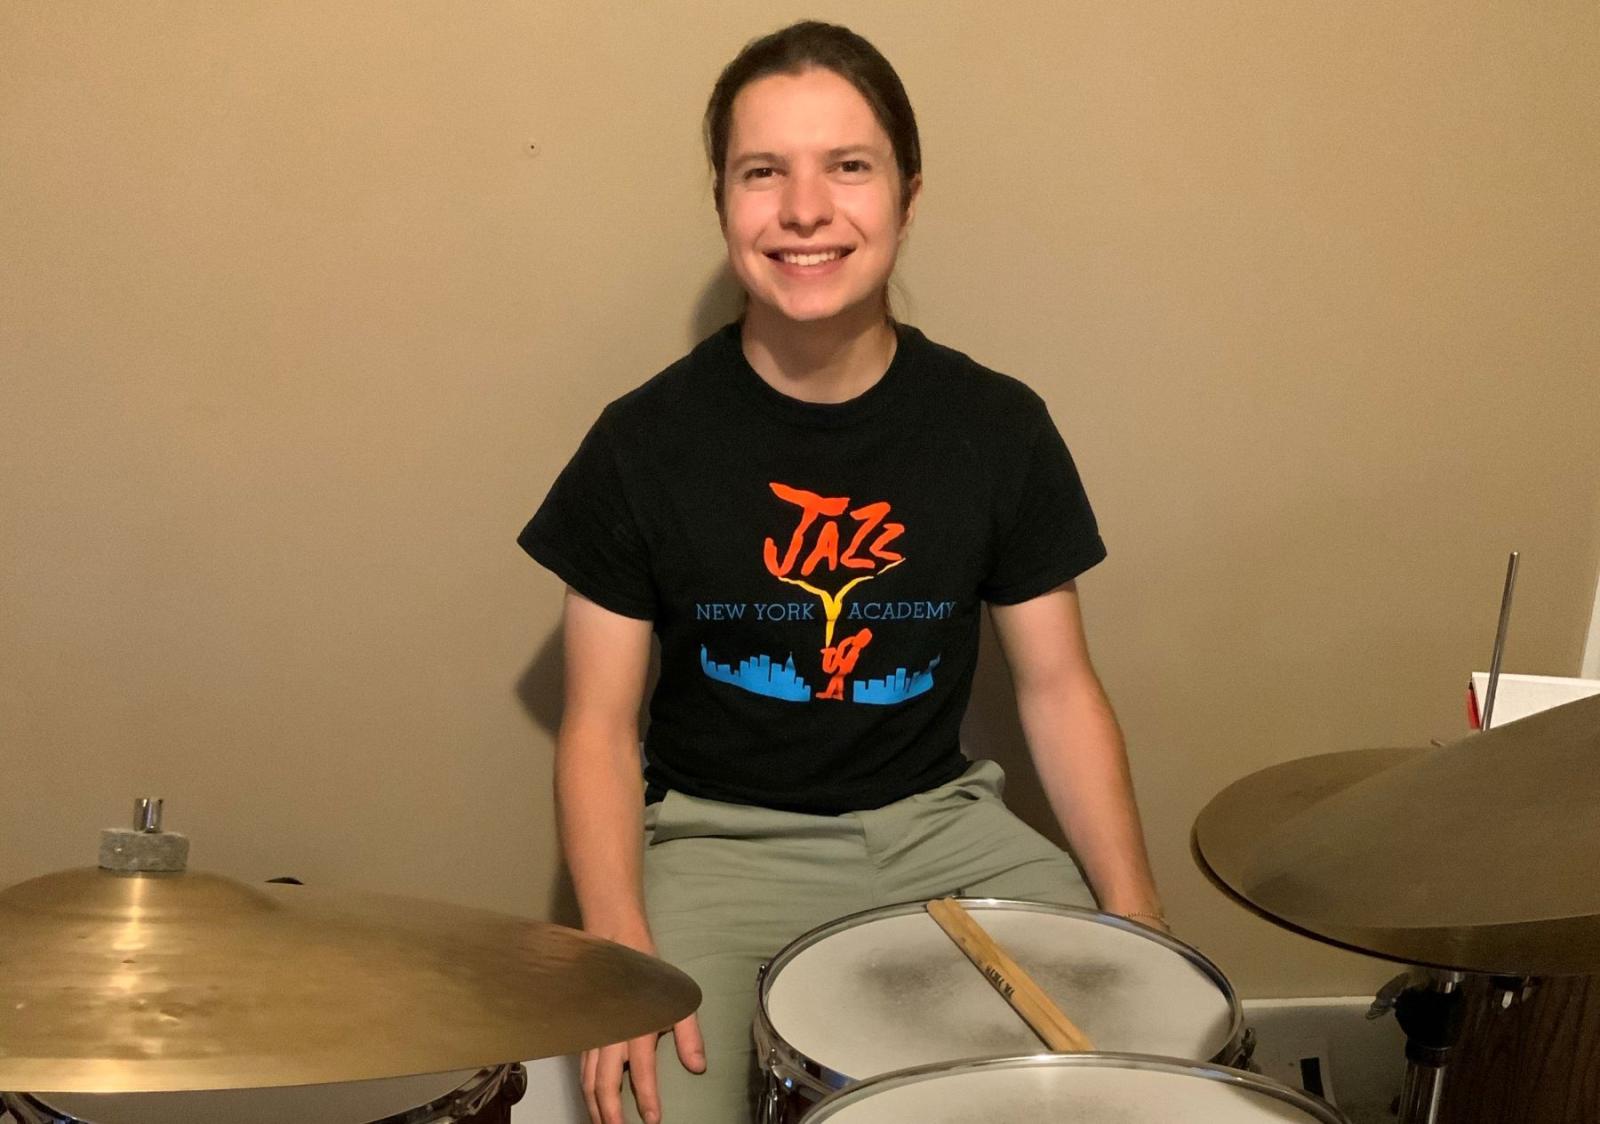 Nolan Ehlers '20 posing in front of drums